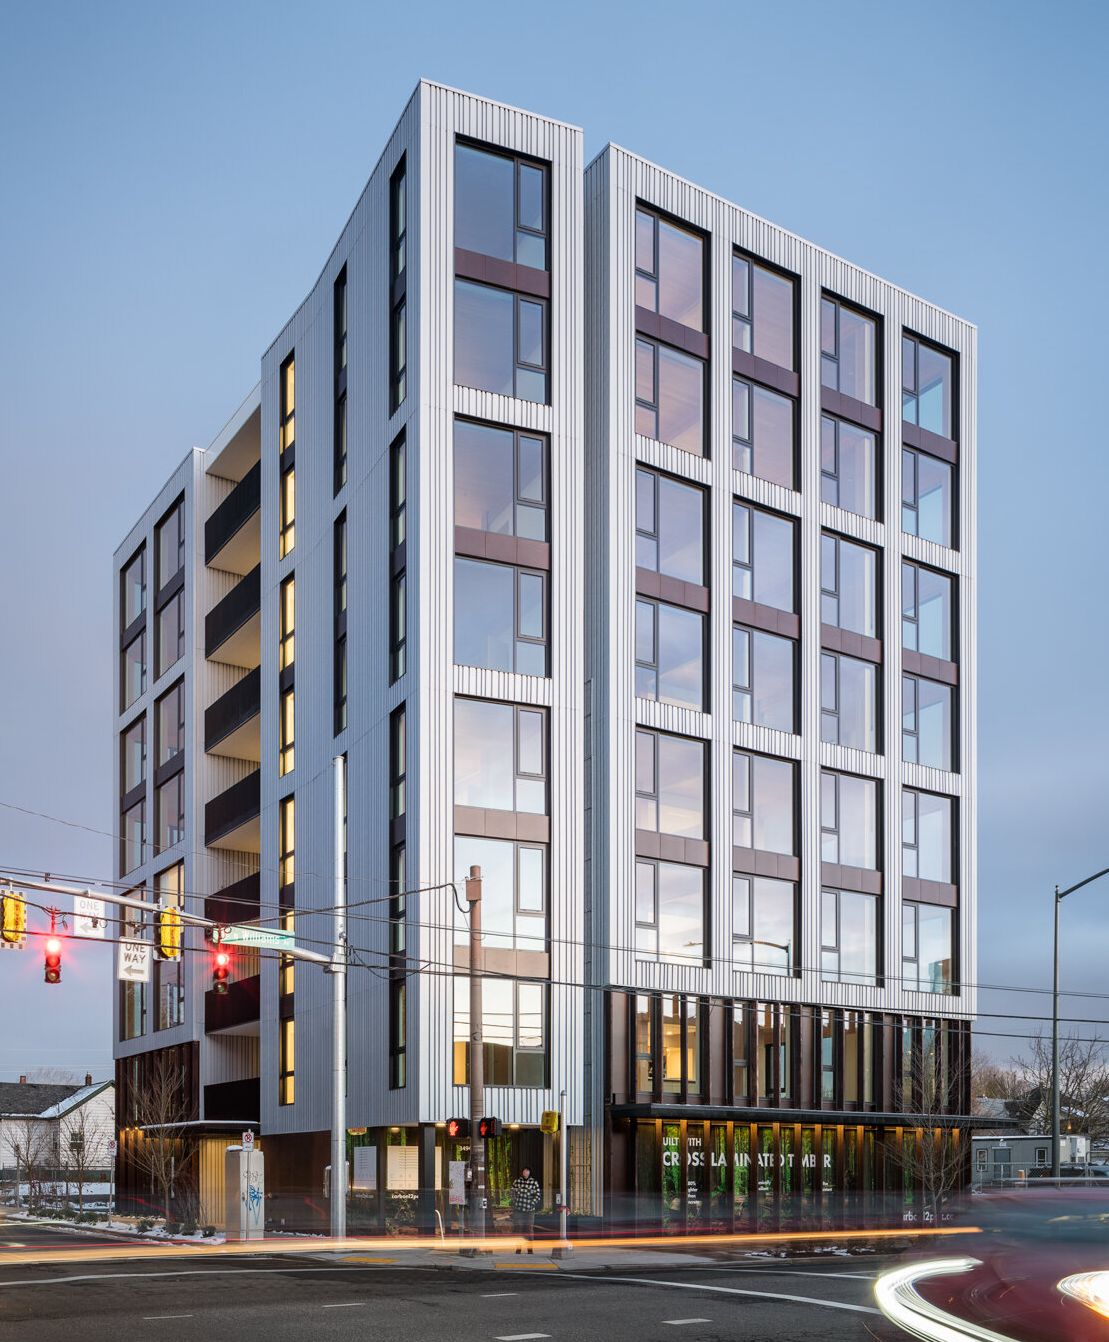 The tallest all-wood building in the U.S. is Carbon12, a condominium building in Portland, Oregon.